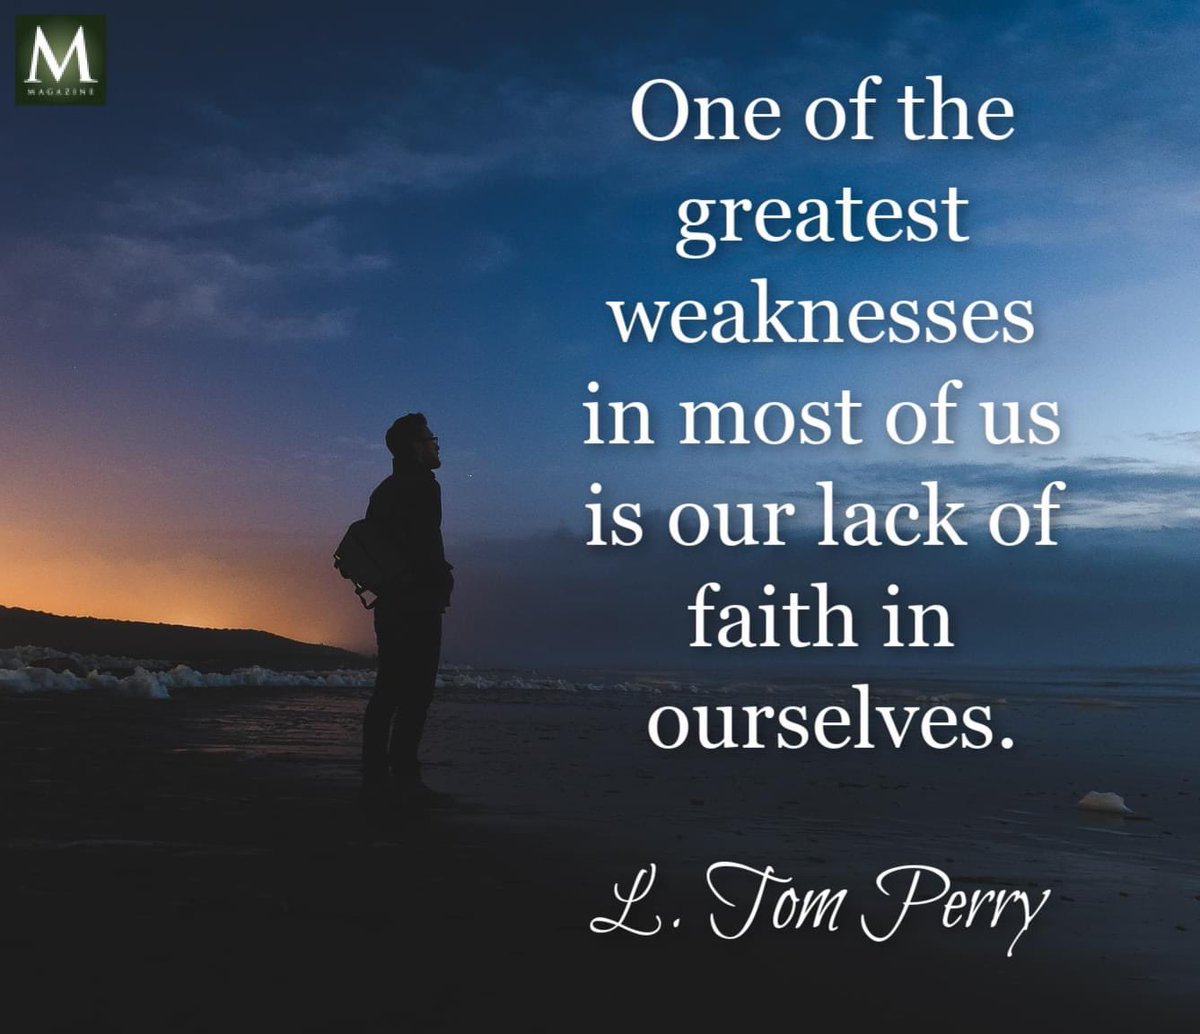 'One of the greatest weaknesses in most of us is our lack of faith in ourselves.' ~ Elder L. Tom Perry

 #TrustGod #CountOnHim #WordOfGod #HearHim #ComeUntoChrist #ShareGoodness #ChildrenOfGod #GodLovesYou #TheChurchOfJesusChristOfLatterDaySaints